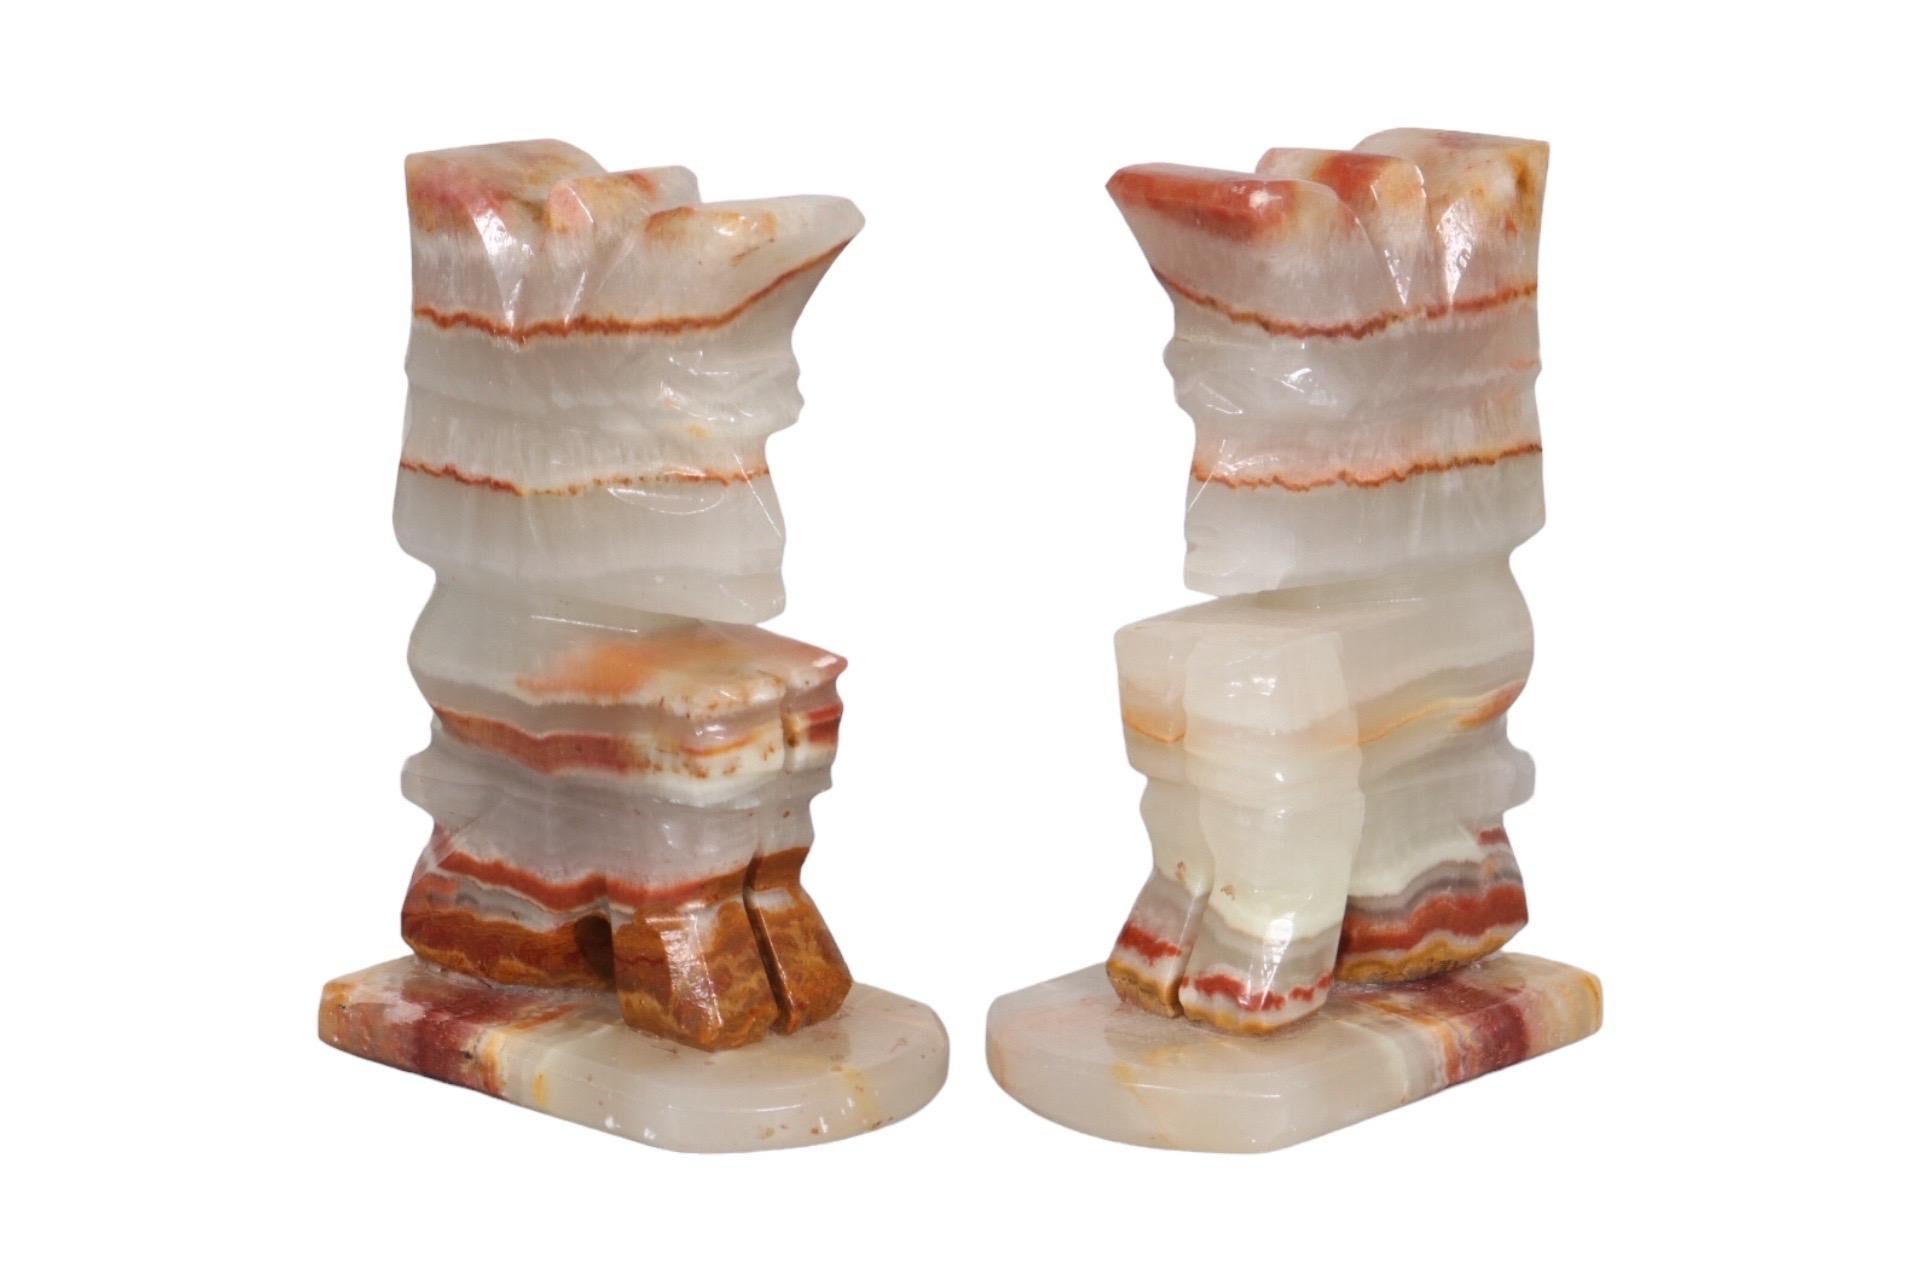 A pair of agate bookends carved in the shape of Indians seated in a hook position. Simple carved lines detail the roach headdress, face and hair. Agate is richly banded in crimson and caramel tones against a translucent off white. Dimensions per